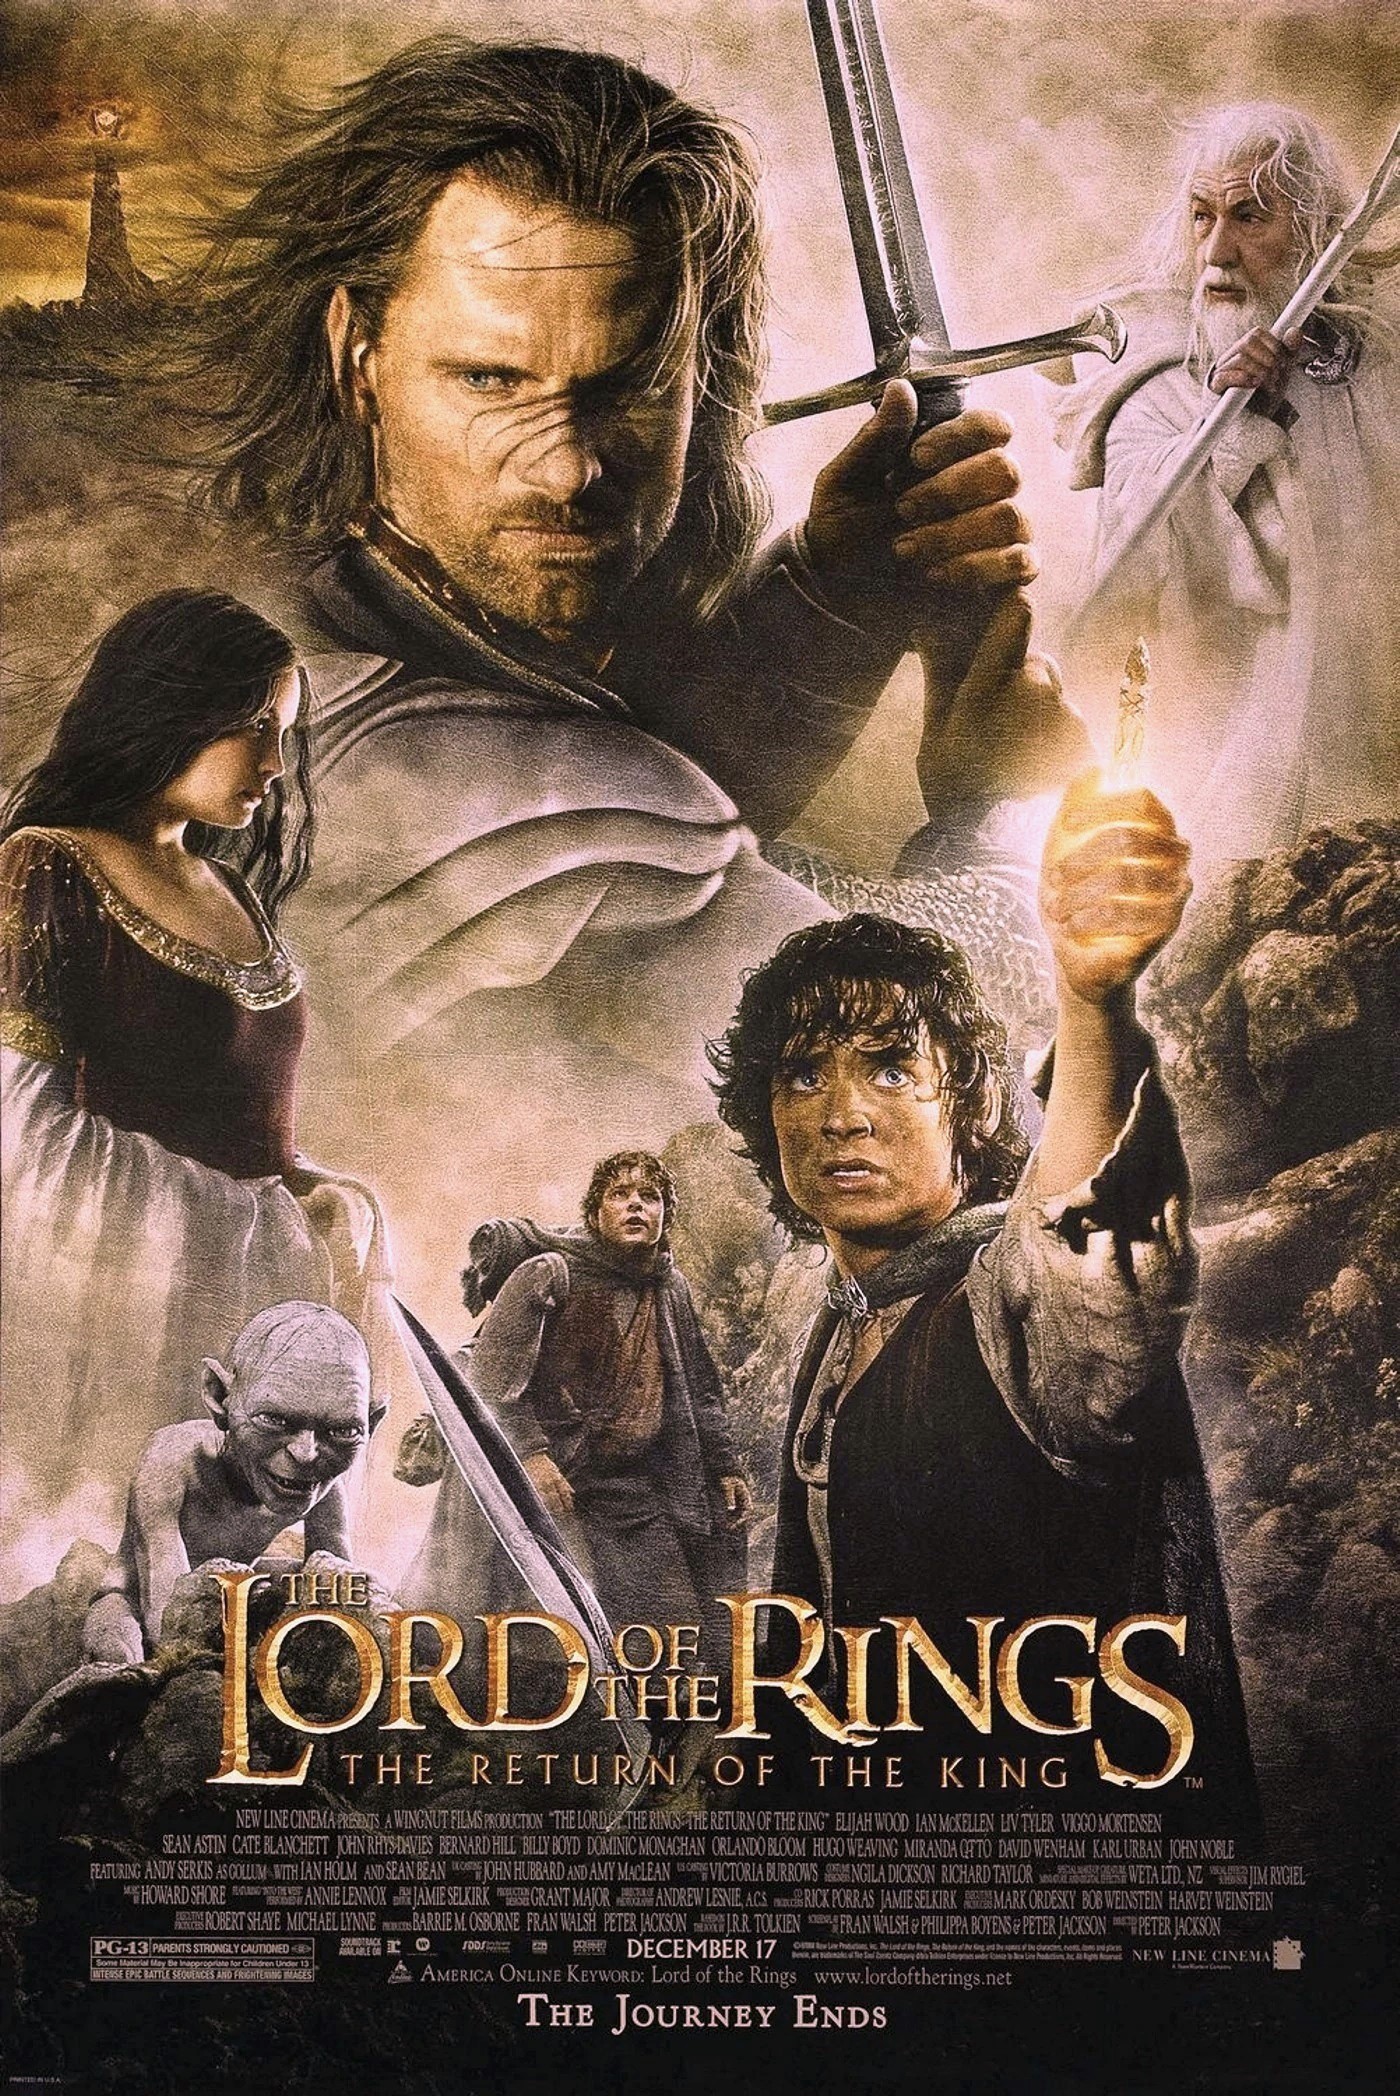 The lord of the rings 4 the return of saruman full movie in hindi download